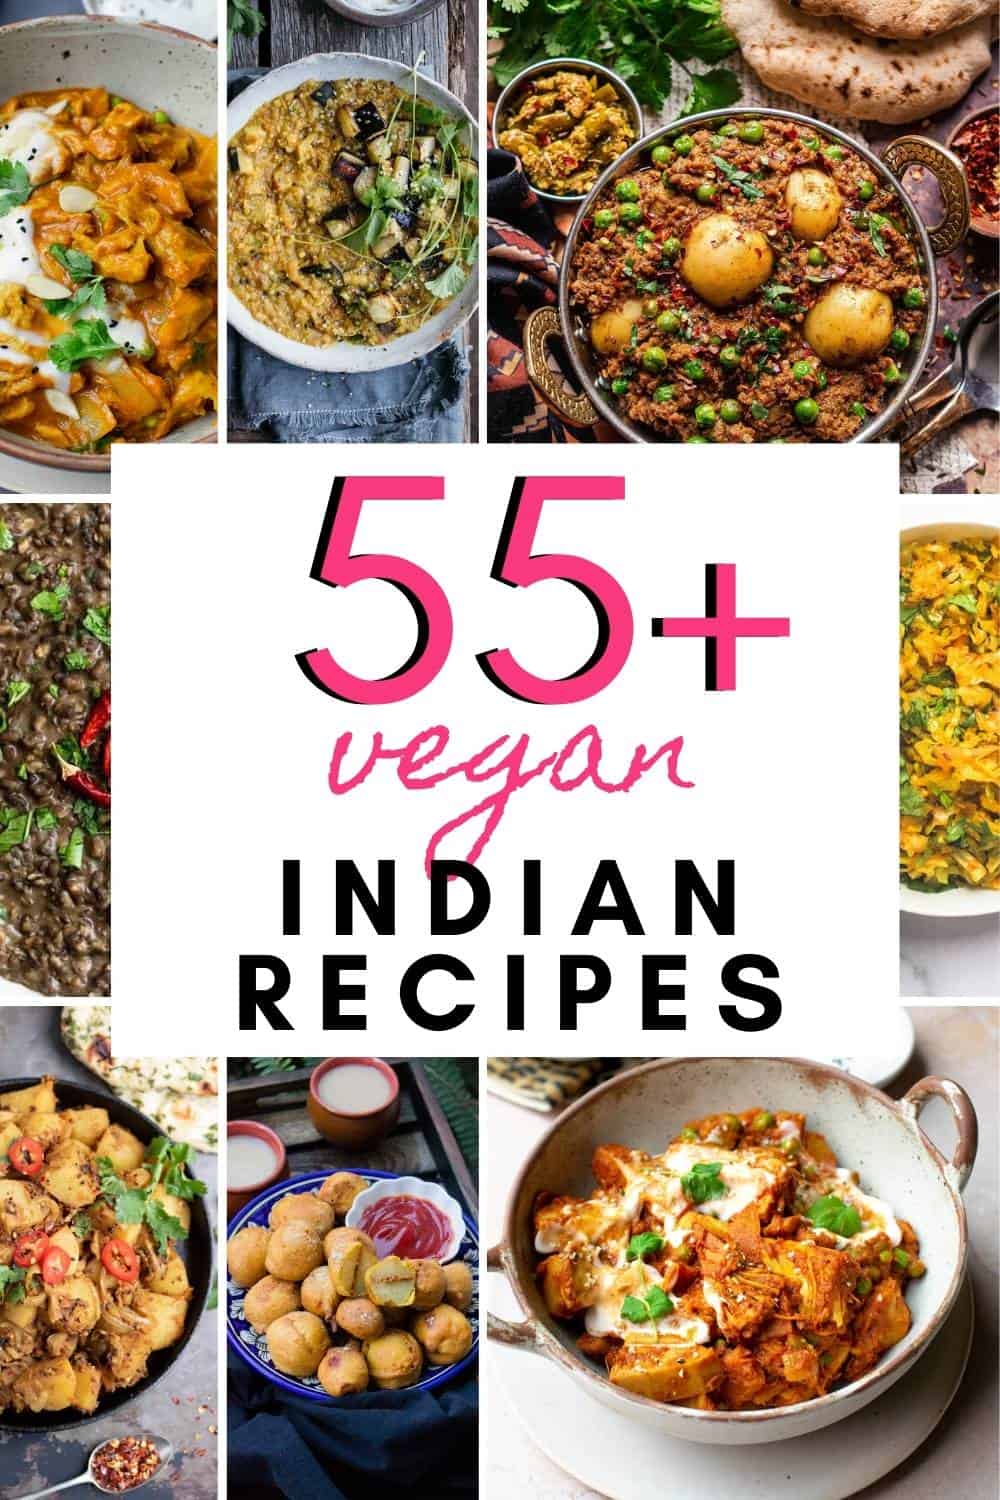 Collage of vegan Indian recipes with a title in the middle.